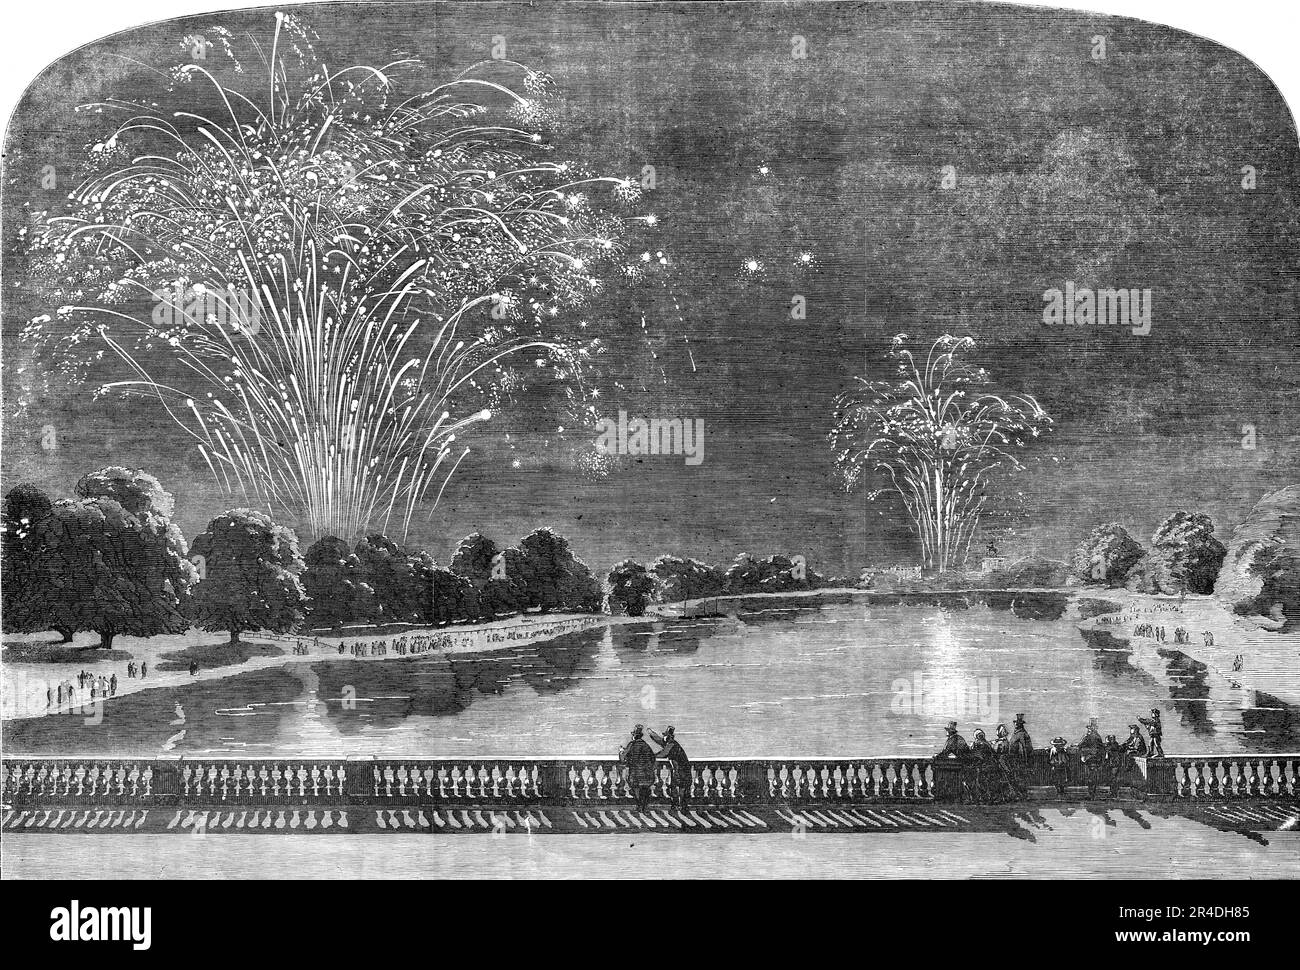 The Peace Commemoration - the Fireworks in Hyde-Park and the Green-Park, sketched from Kensington-Gardens, [London], 1856. Celebrating the end of the Crimean War. [The display] '...comprised almost everything that is either new, curious, or beautiful in pyrotechny...The stars, hoops, and crosses elicited the most enthusiastic expressions of delight...Those rockets which, exploding in the air, threw out clusters of coloured stars were also much admired; while loud cheering arose from all sides when a number of shells, discharged together, burst far above the heads of the spectators, changing in Stock Photo